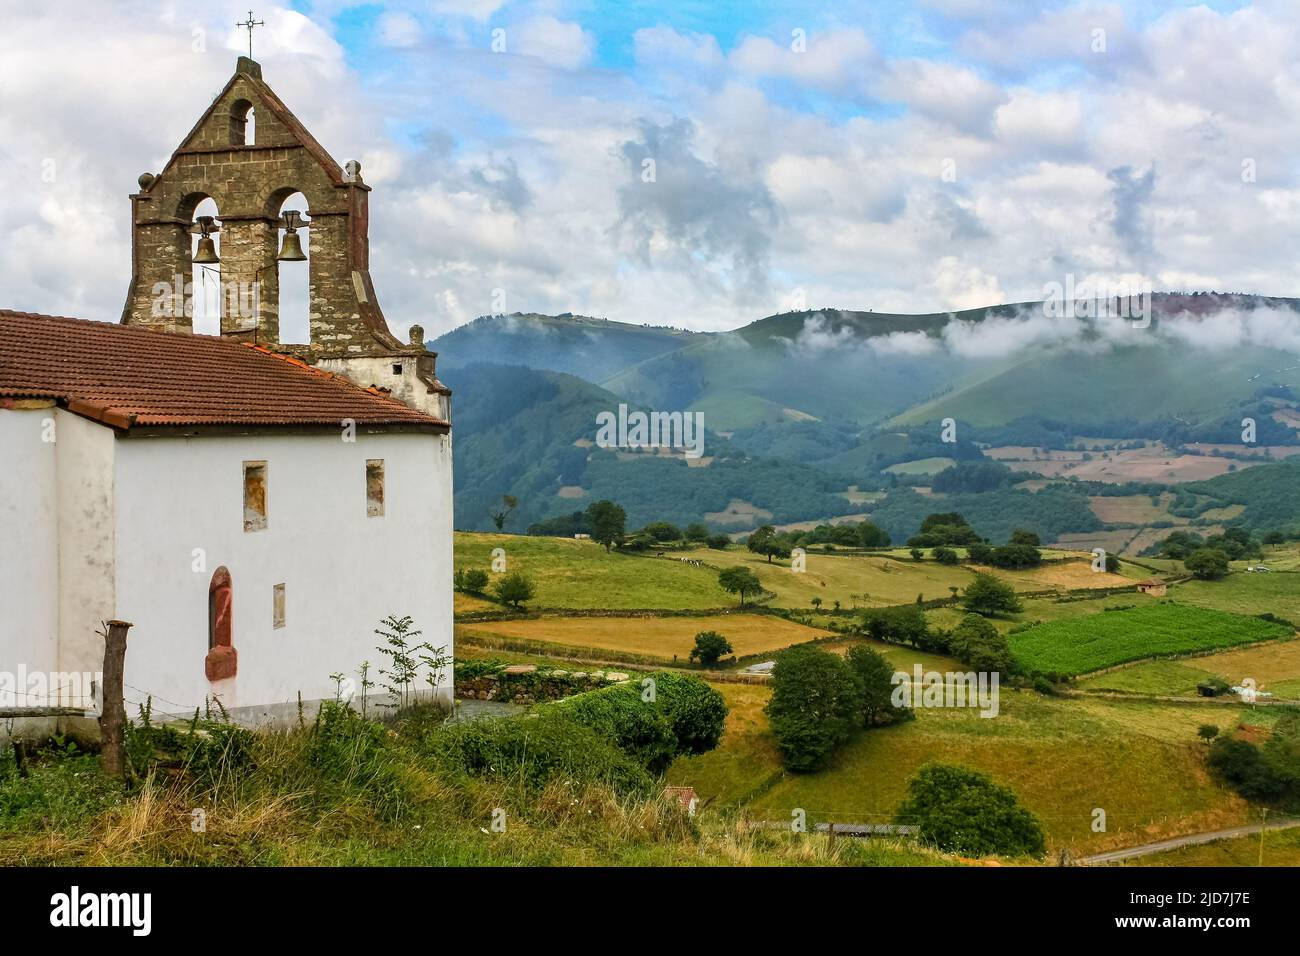 Ancient church with bell tower in the green field with high mountains in the background. Asturias Spain Europe. Stock Photo